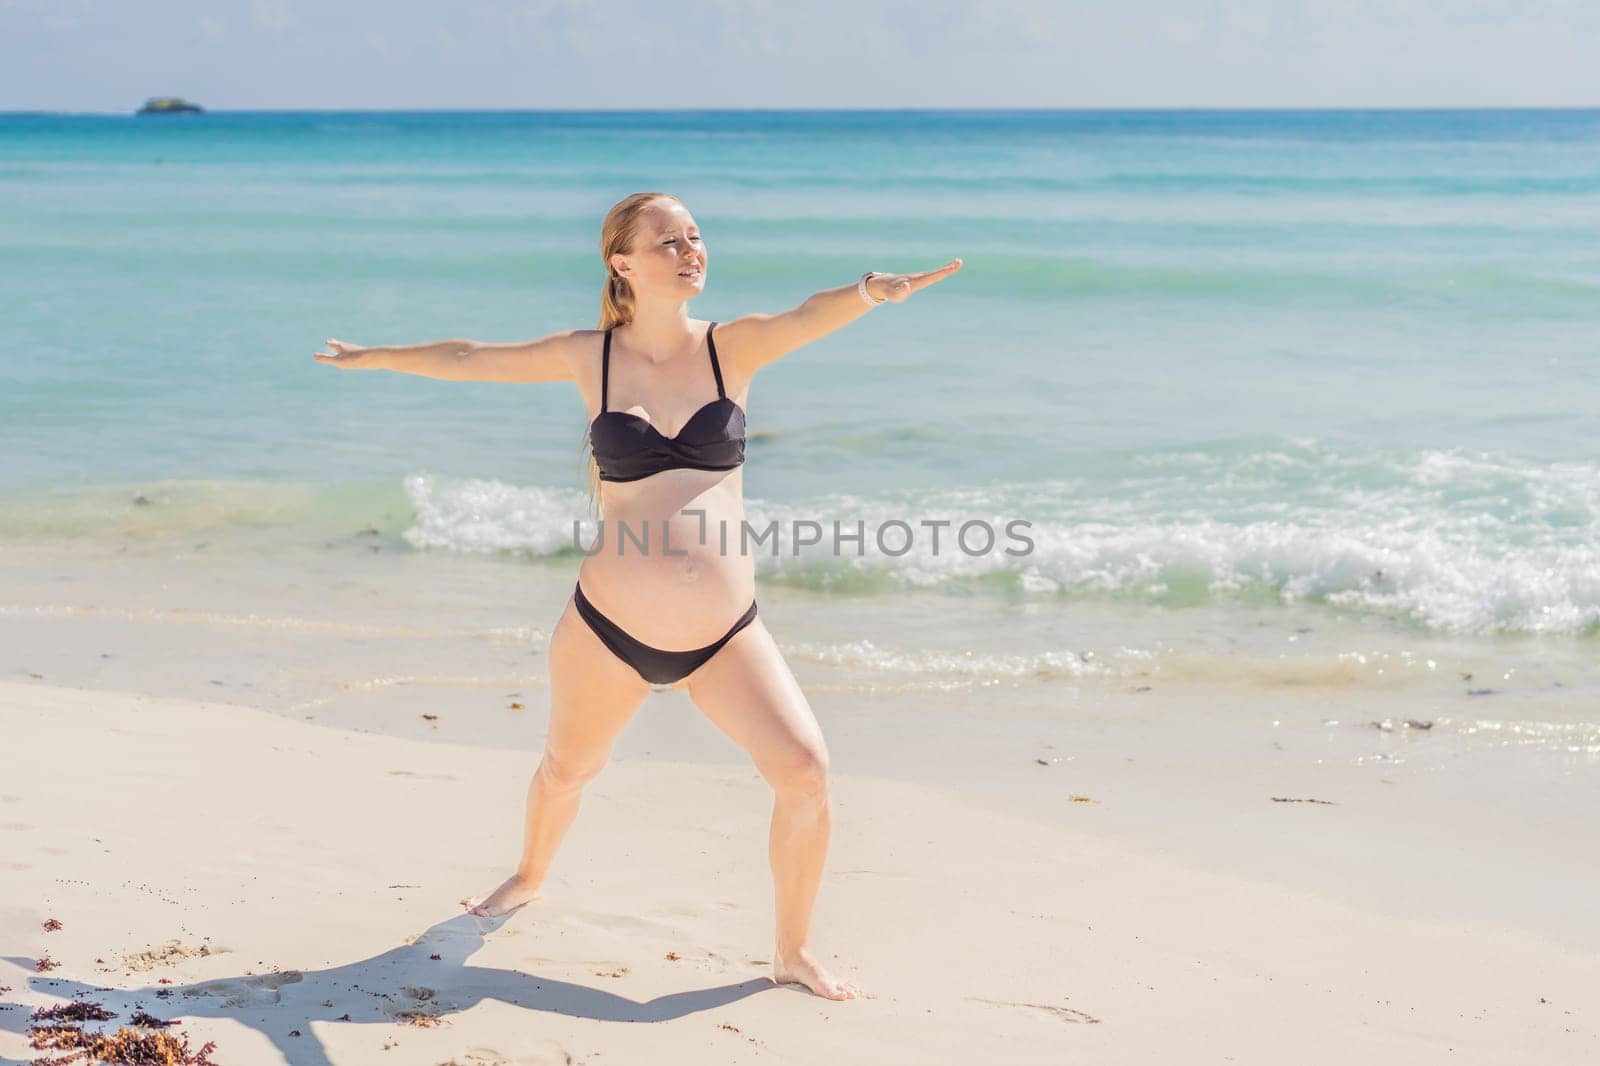 Harmonizing mind and body, a pregnant woman gracefully practices yoga on the beach, embracing the serenity of the seaside for a tranquil and mindful pregnancy experience by galitskaya